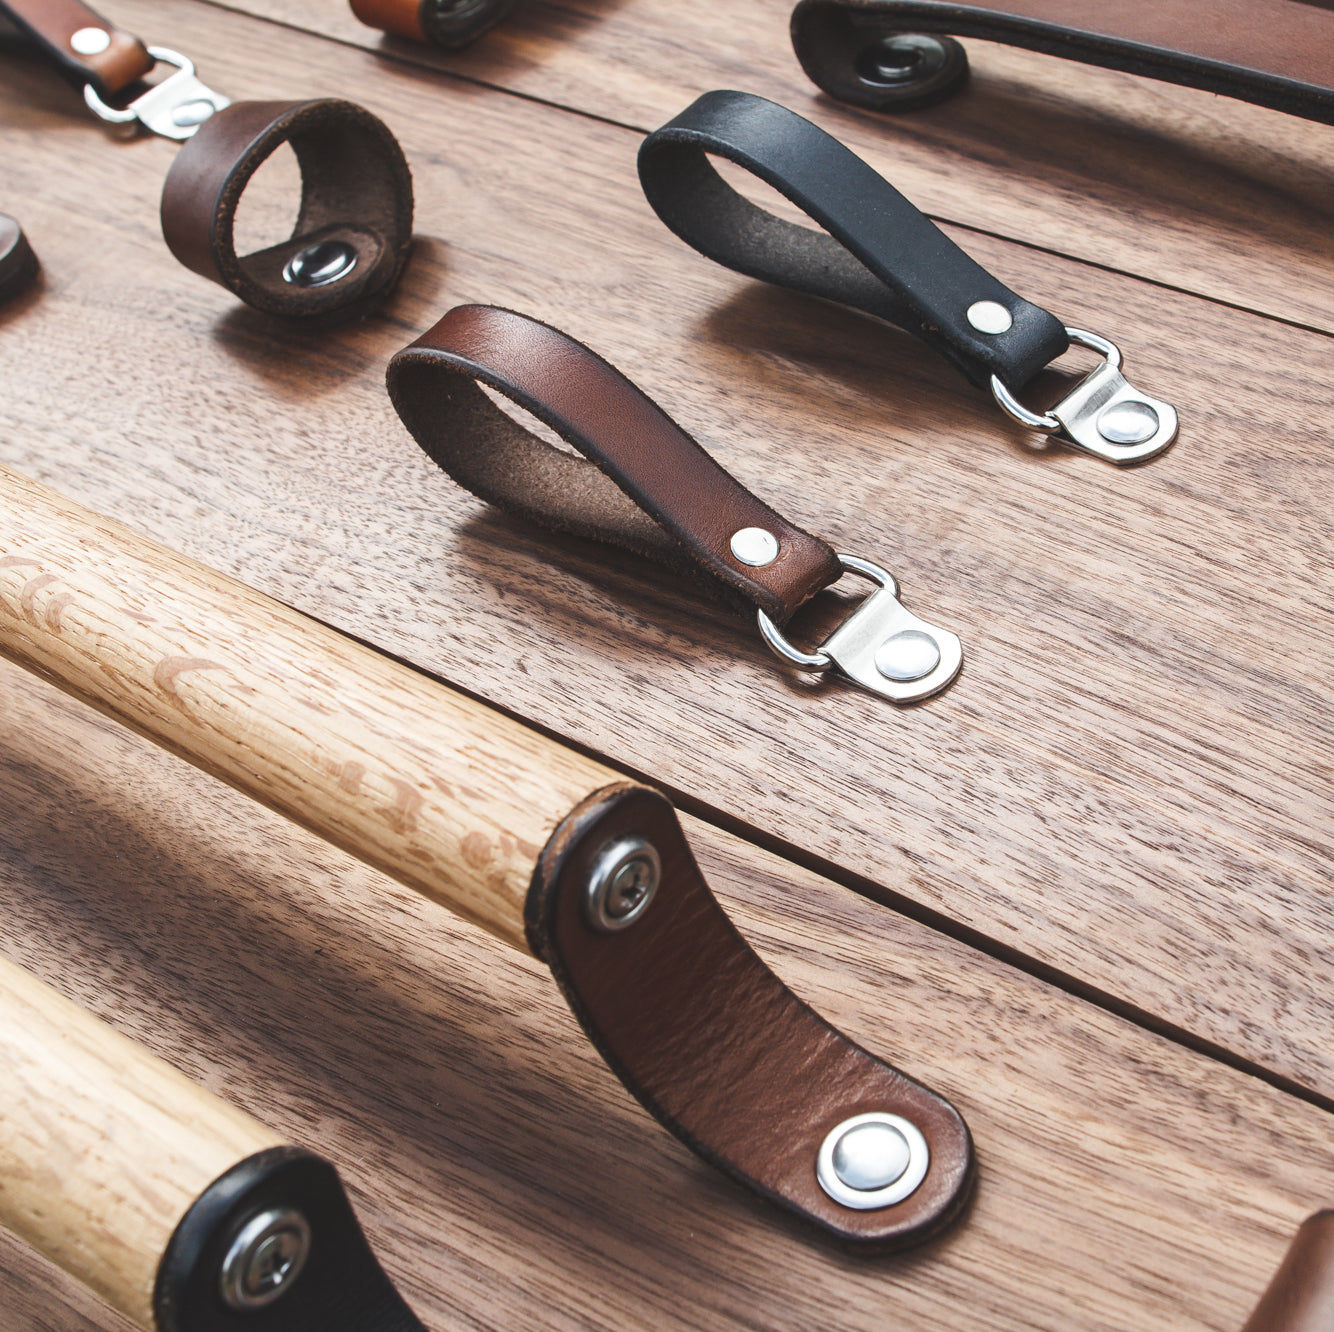 A variety of handcrafted leather and wood handles on a sample board as seen from above and an angle